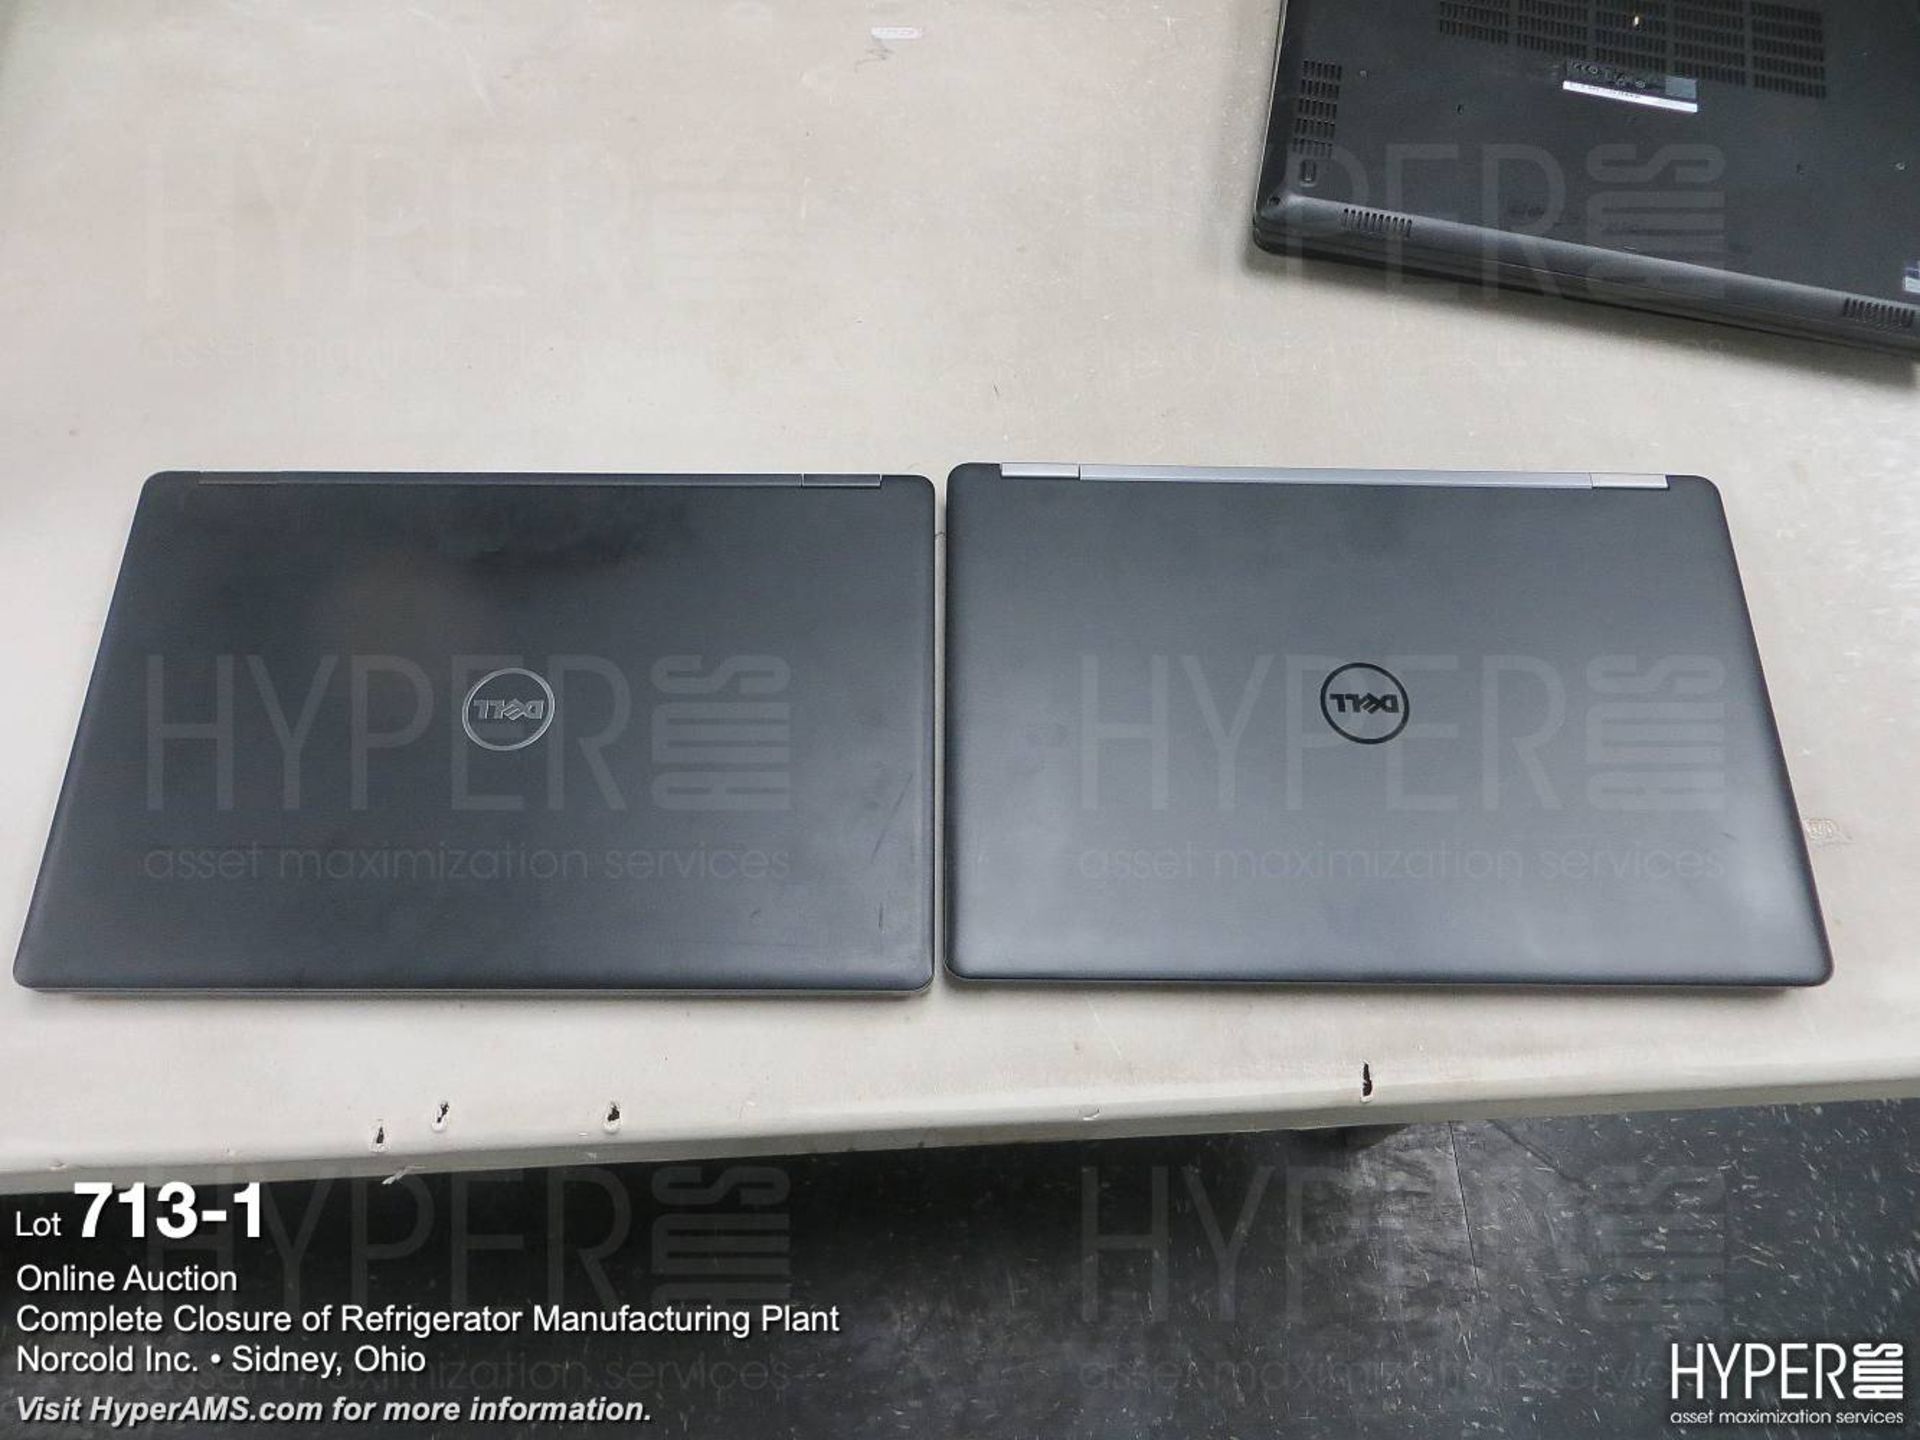 (2) Dell laptops - Image 2 of 4